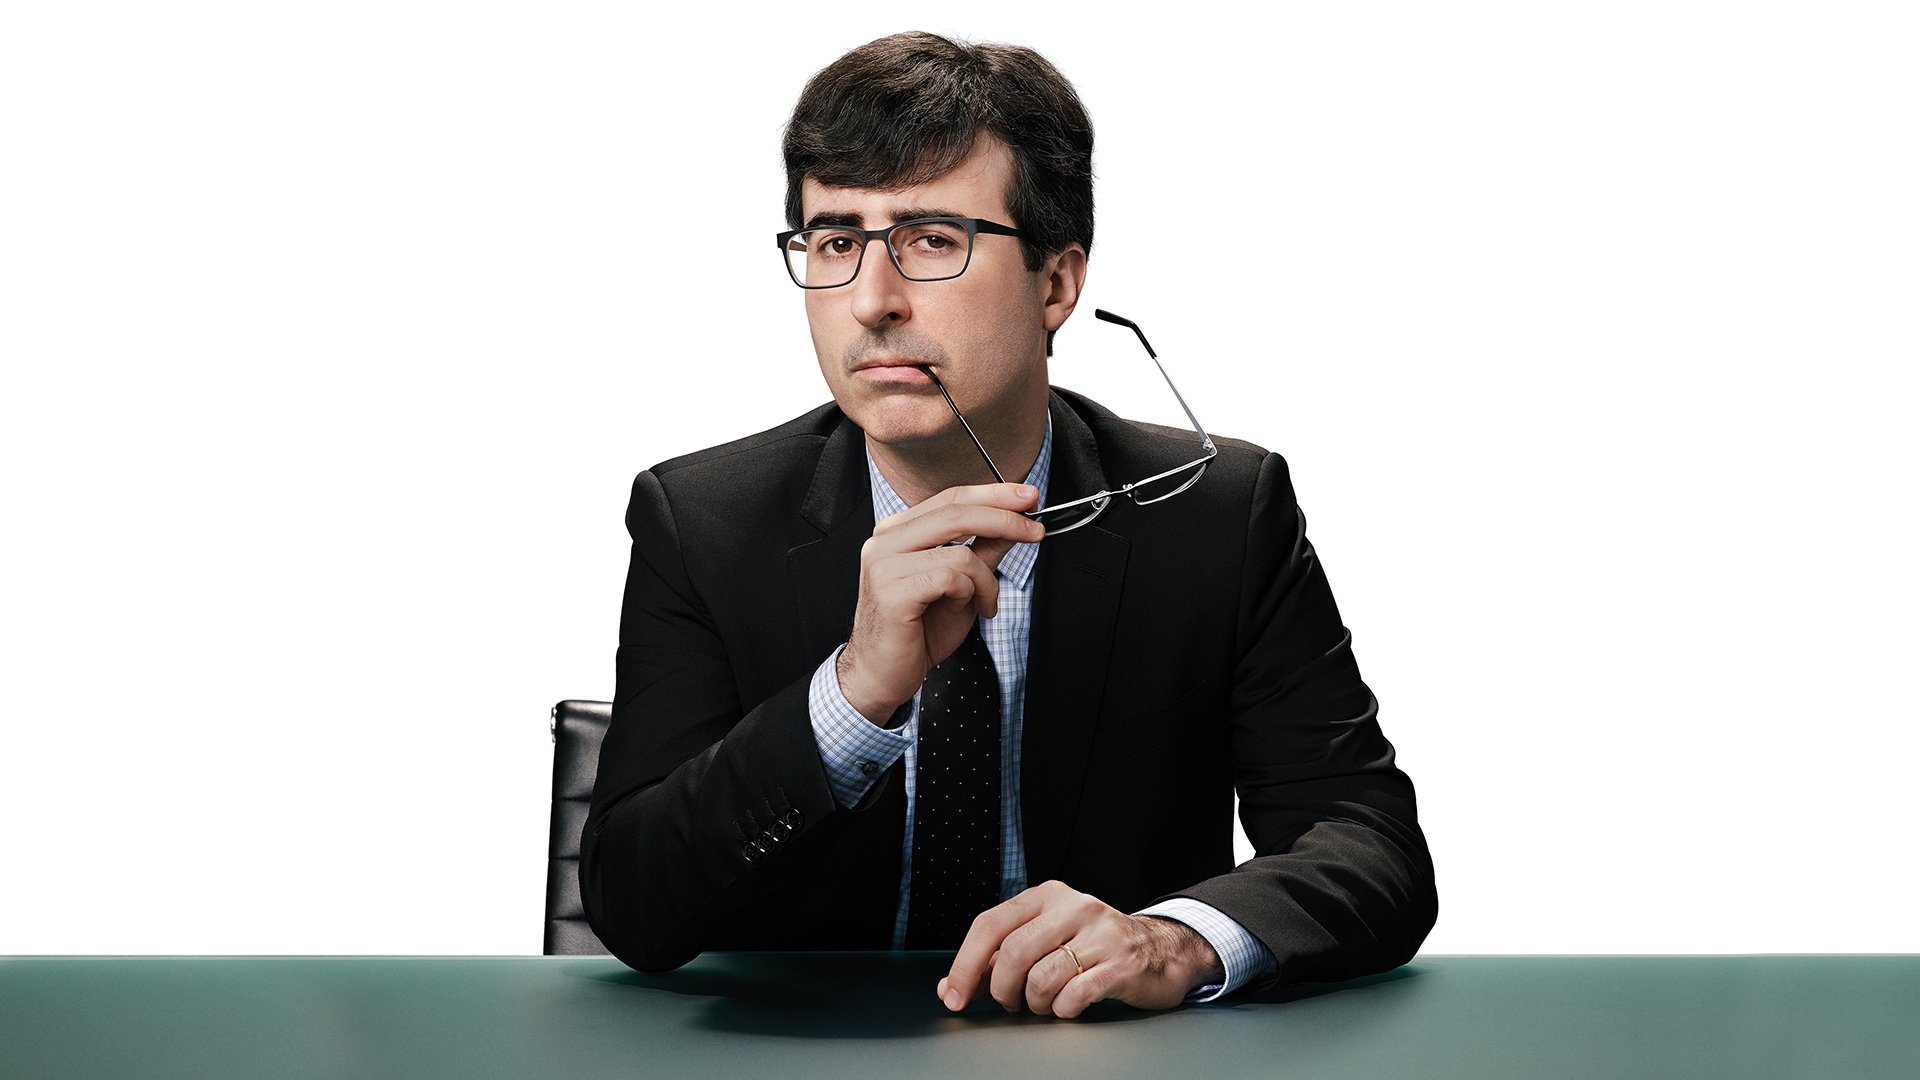 Last Week Tonight With John Oliver HD Wallpaper Background Image